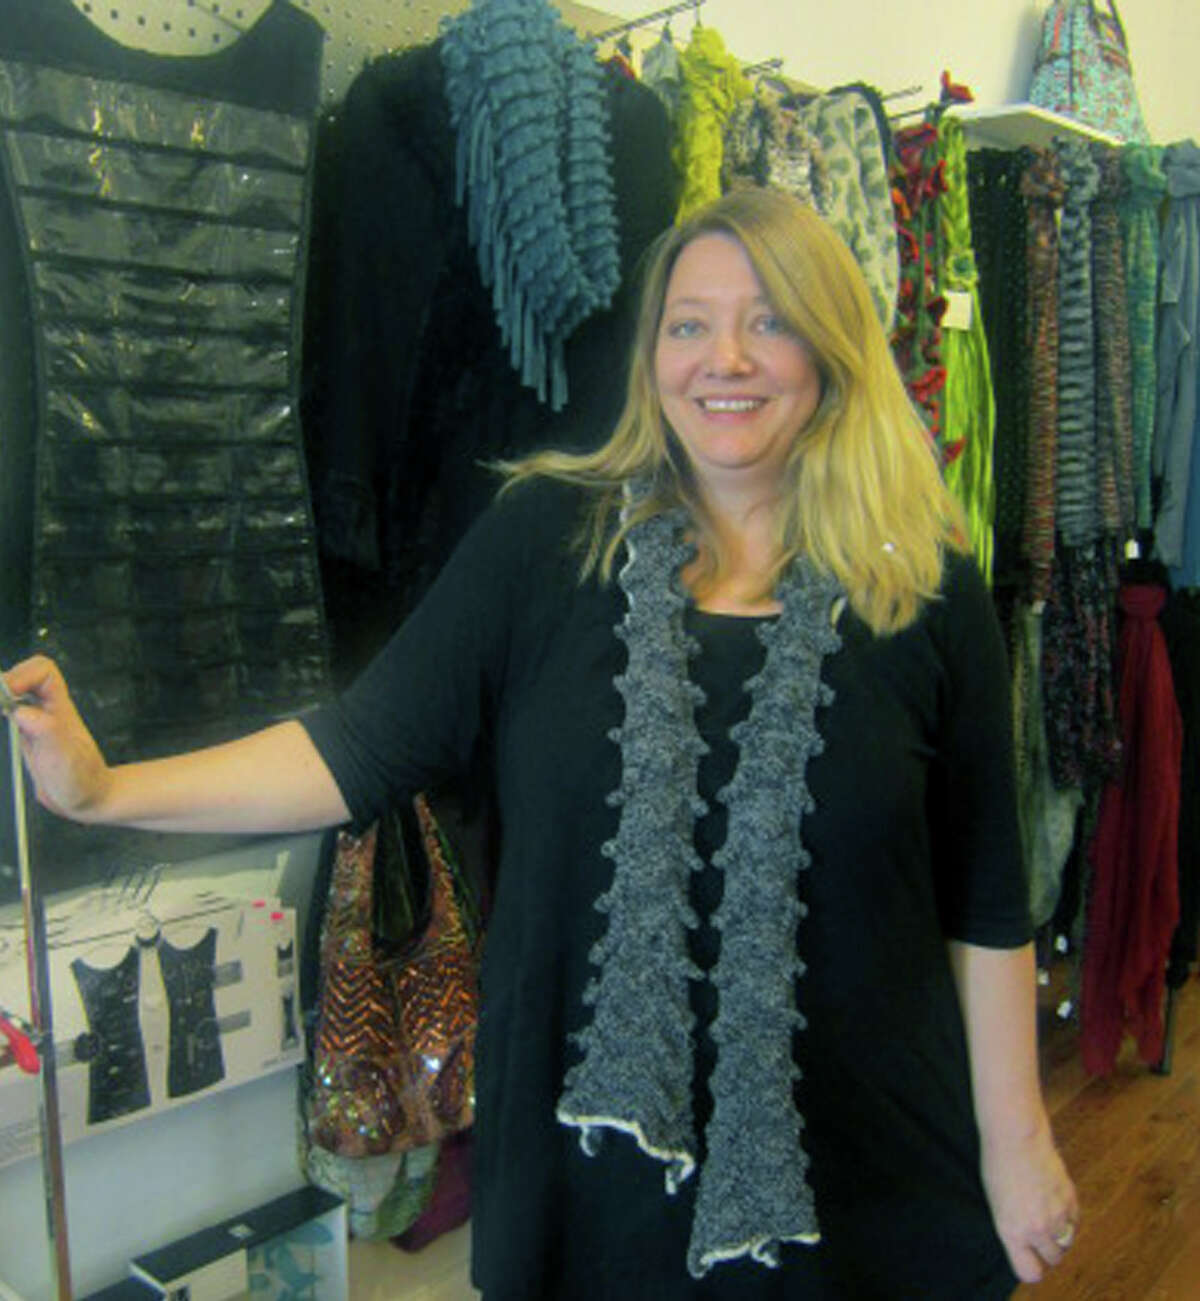 Shop owner Annie Nast offers a welcoming smile to patrons of Daffodil 6, a boutique on Bank Street in New Milford. November 2012